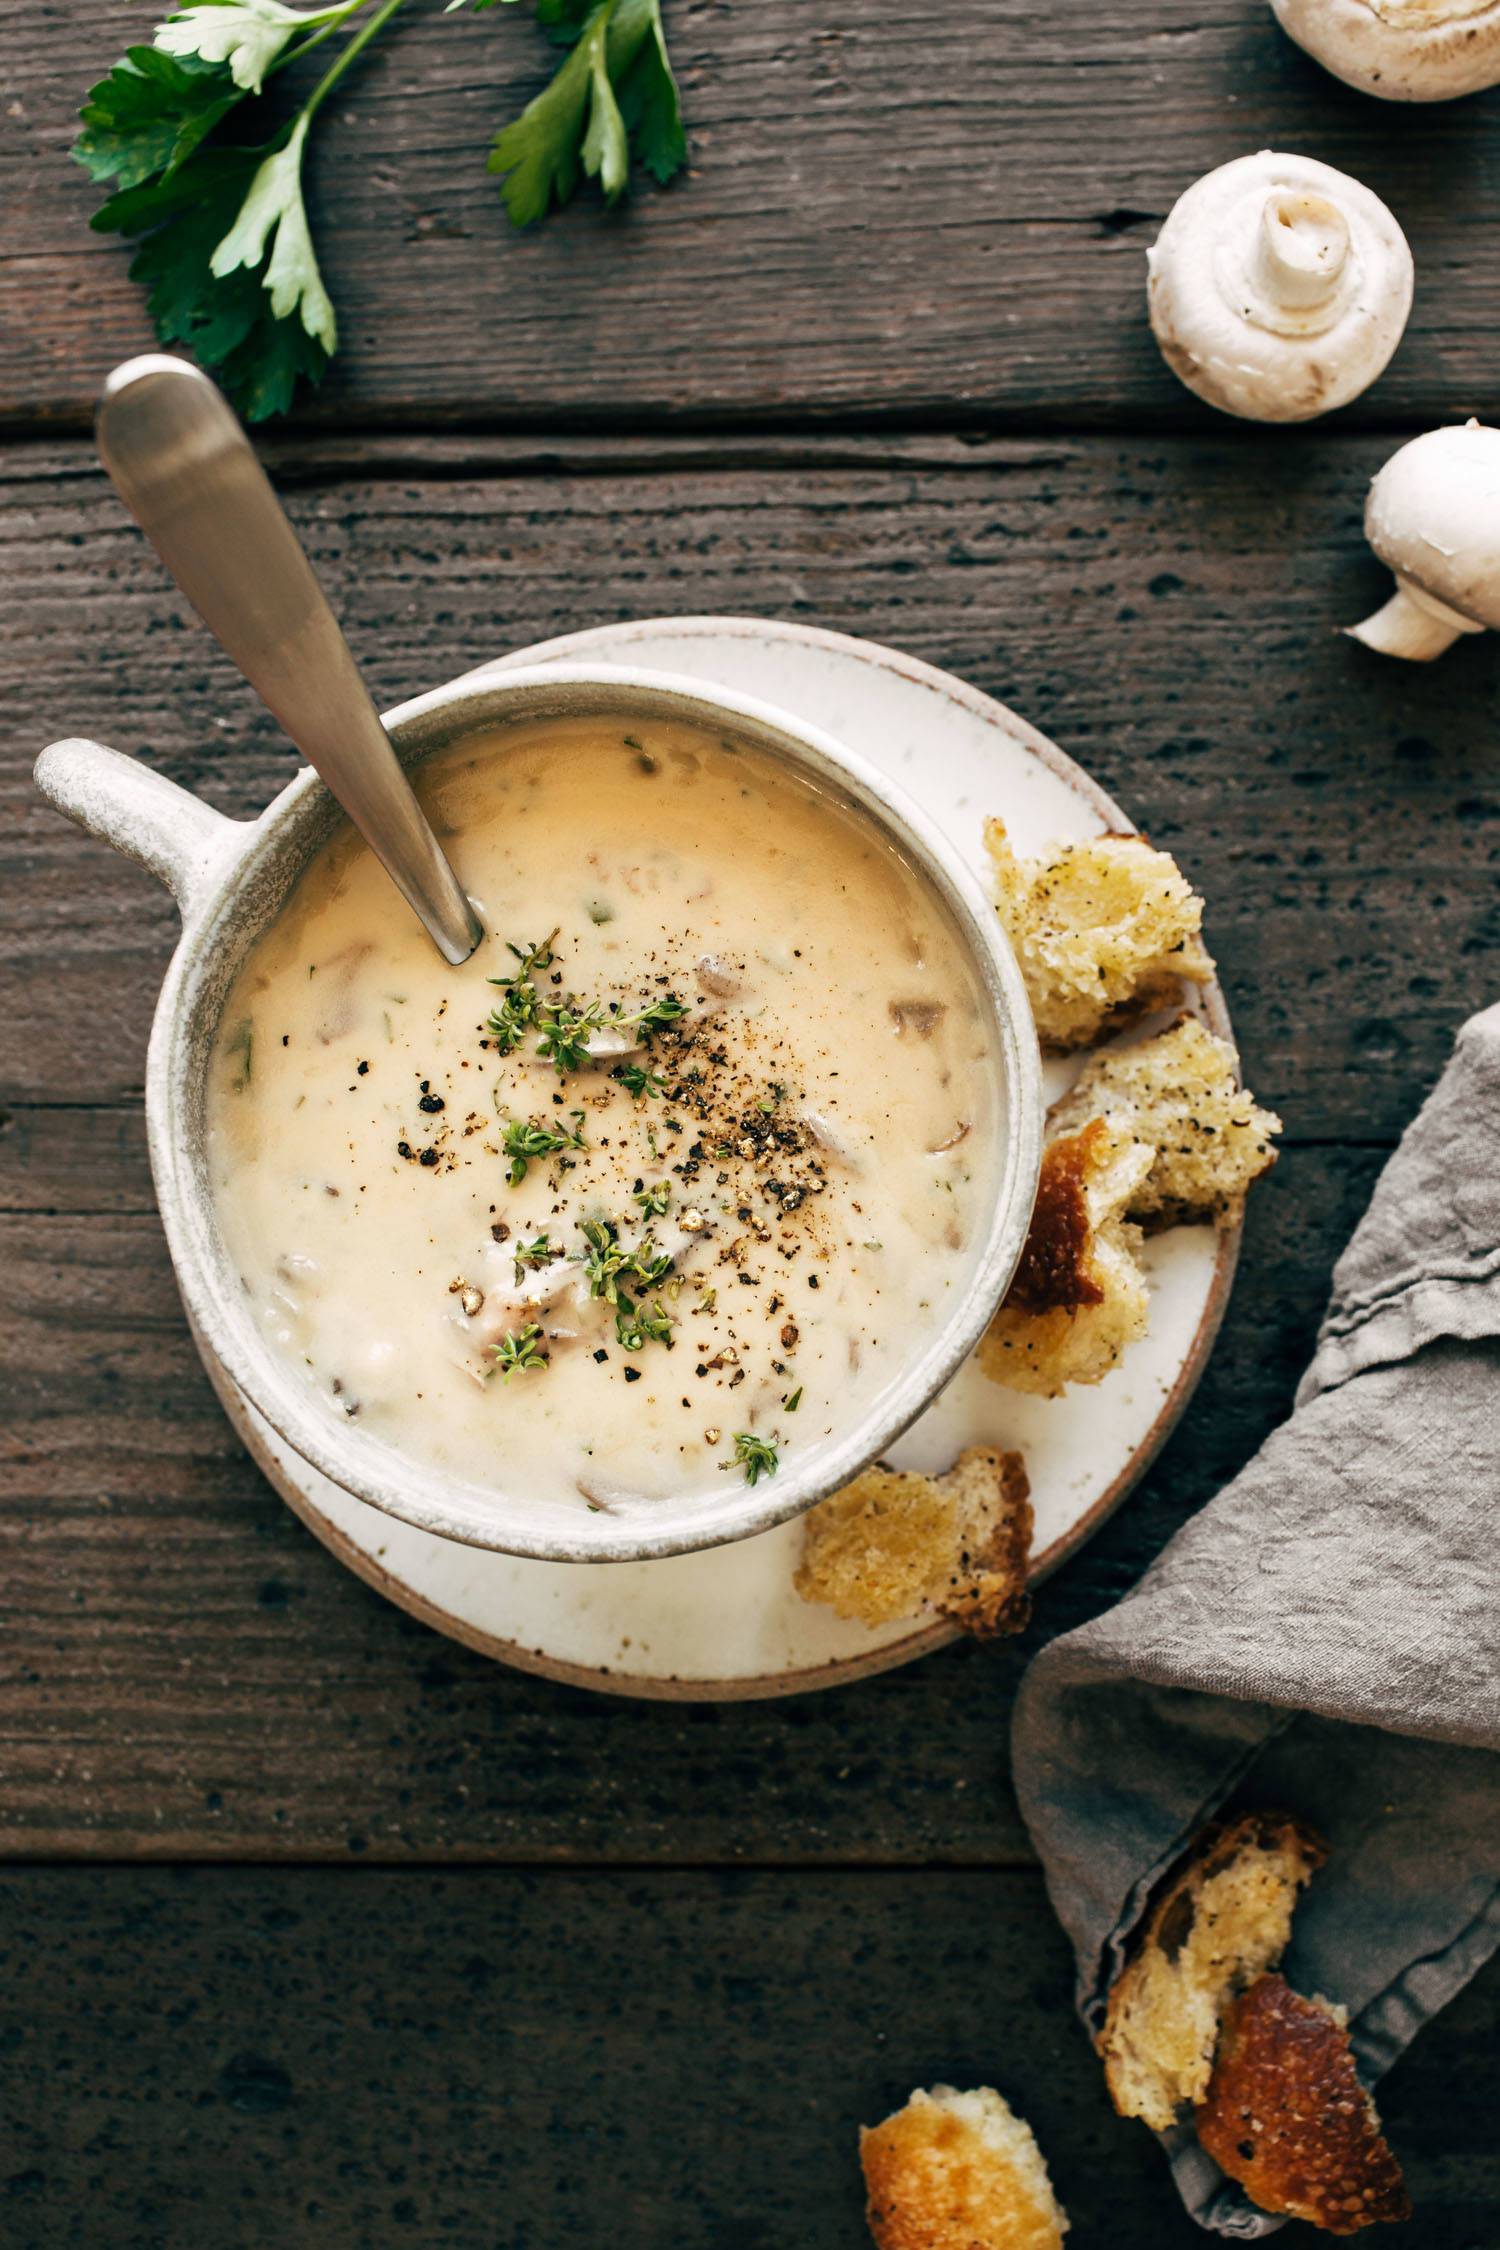 Mushroom soup in a white bowl with croutons on the top and on the side.